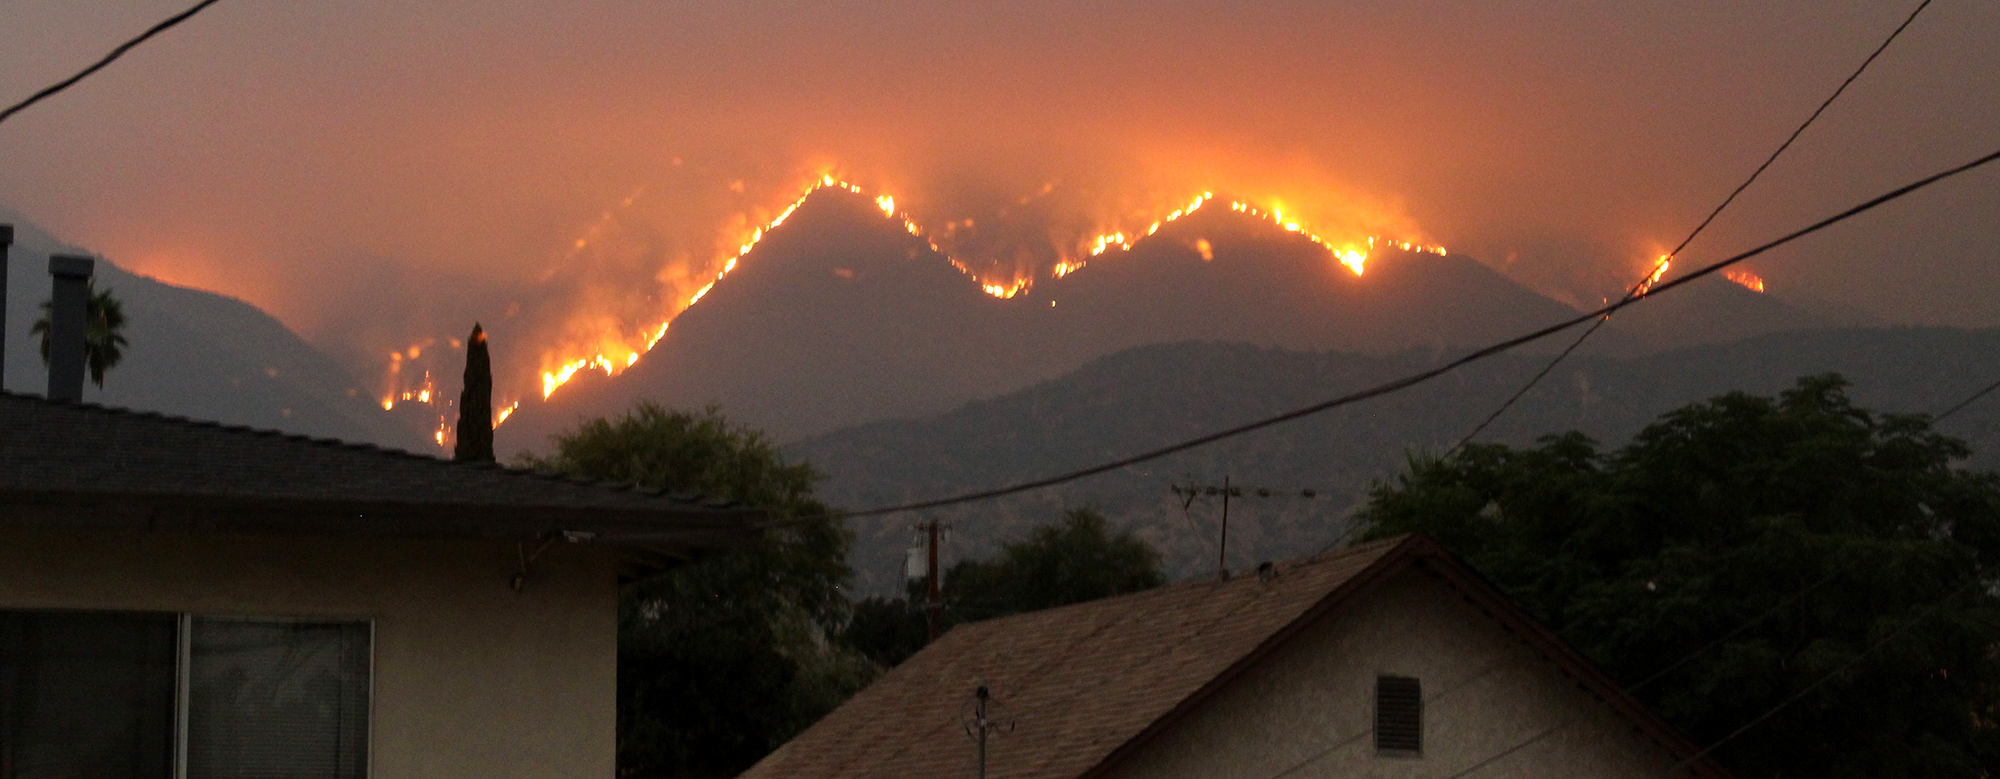 los angeles fires on bobcat mountain